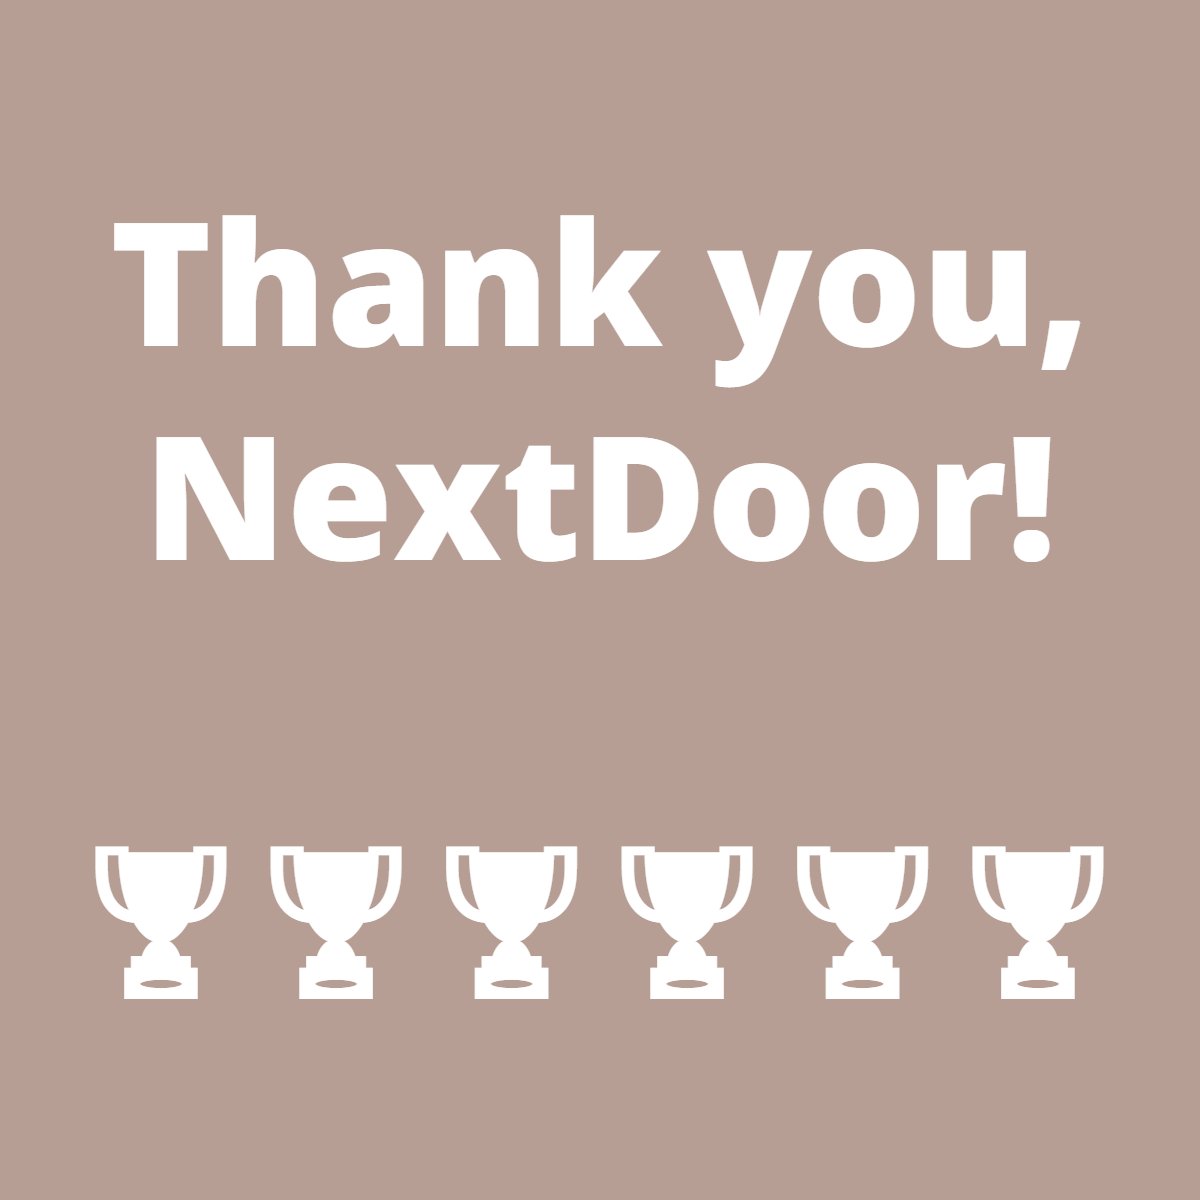 We were just awarded the 2017 Neighborhood Favorite in SIX neighborhoods by NextDoor. Check it out here: bit.ly/2NX3ukh